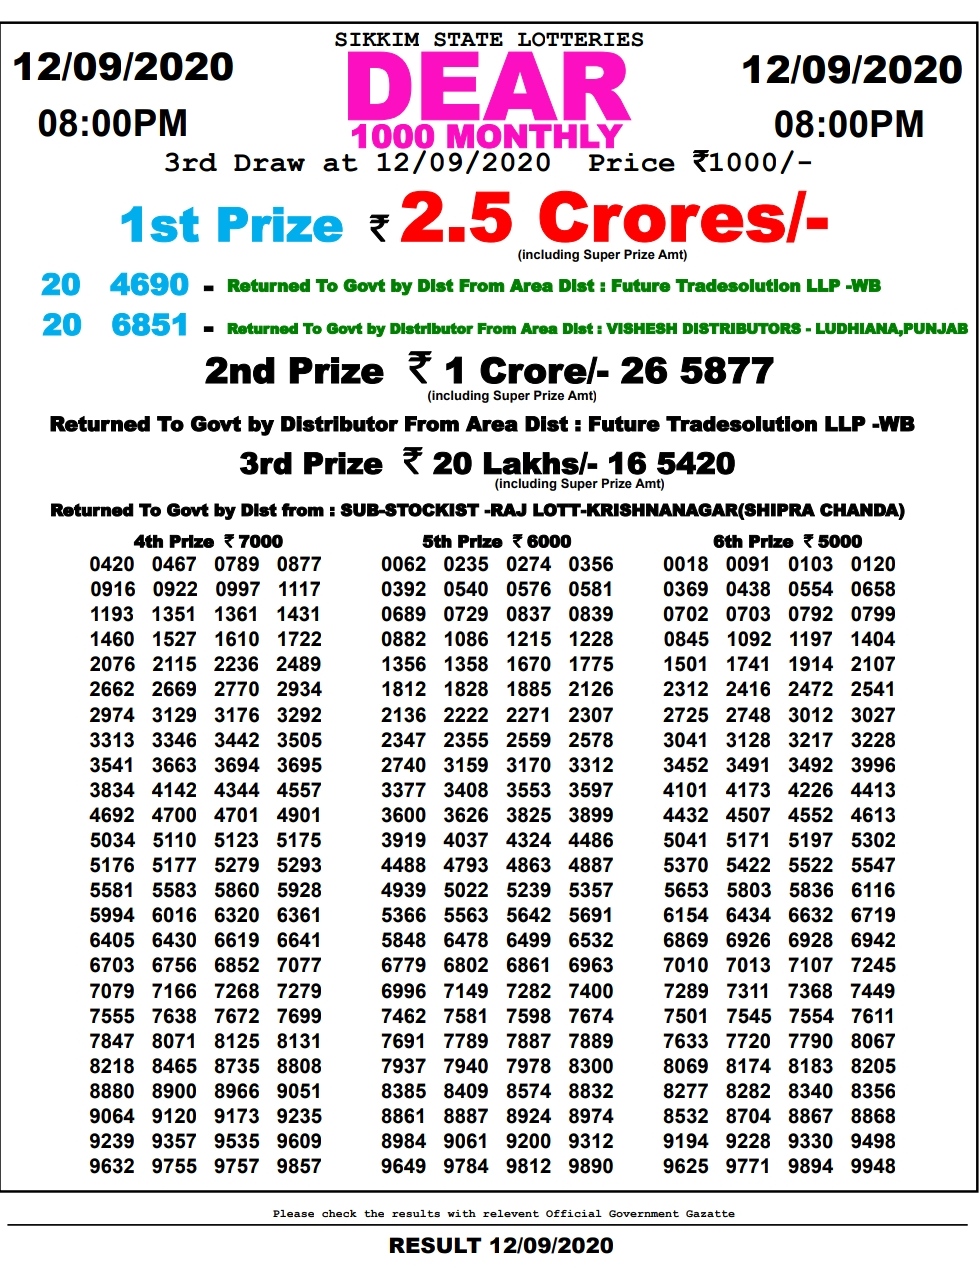 sikkim dear 1000 monthly lottery result 12.9.2020